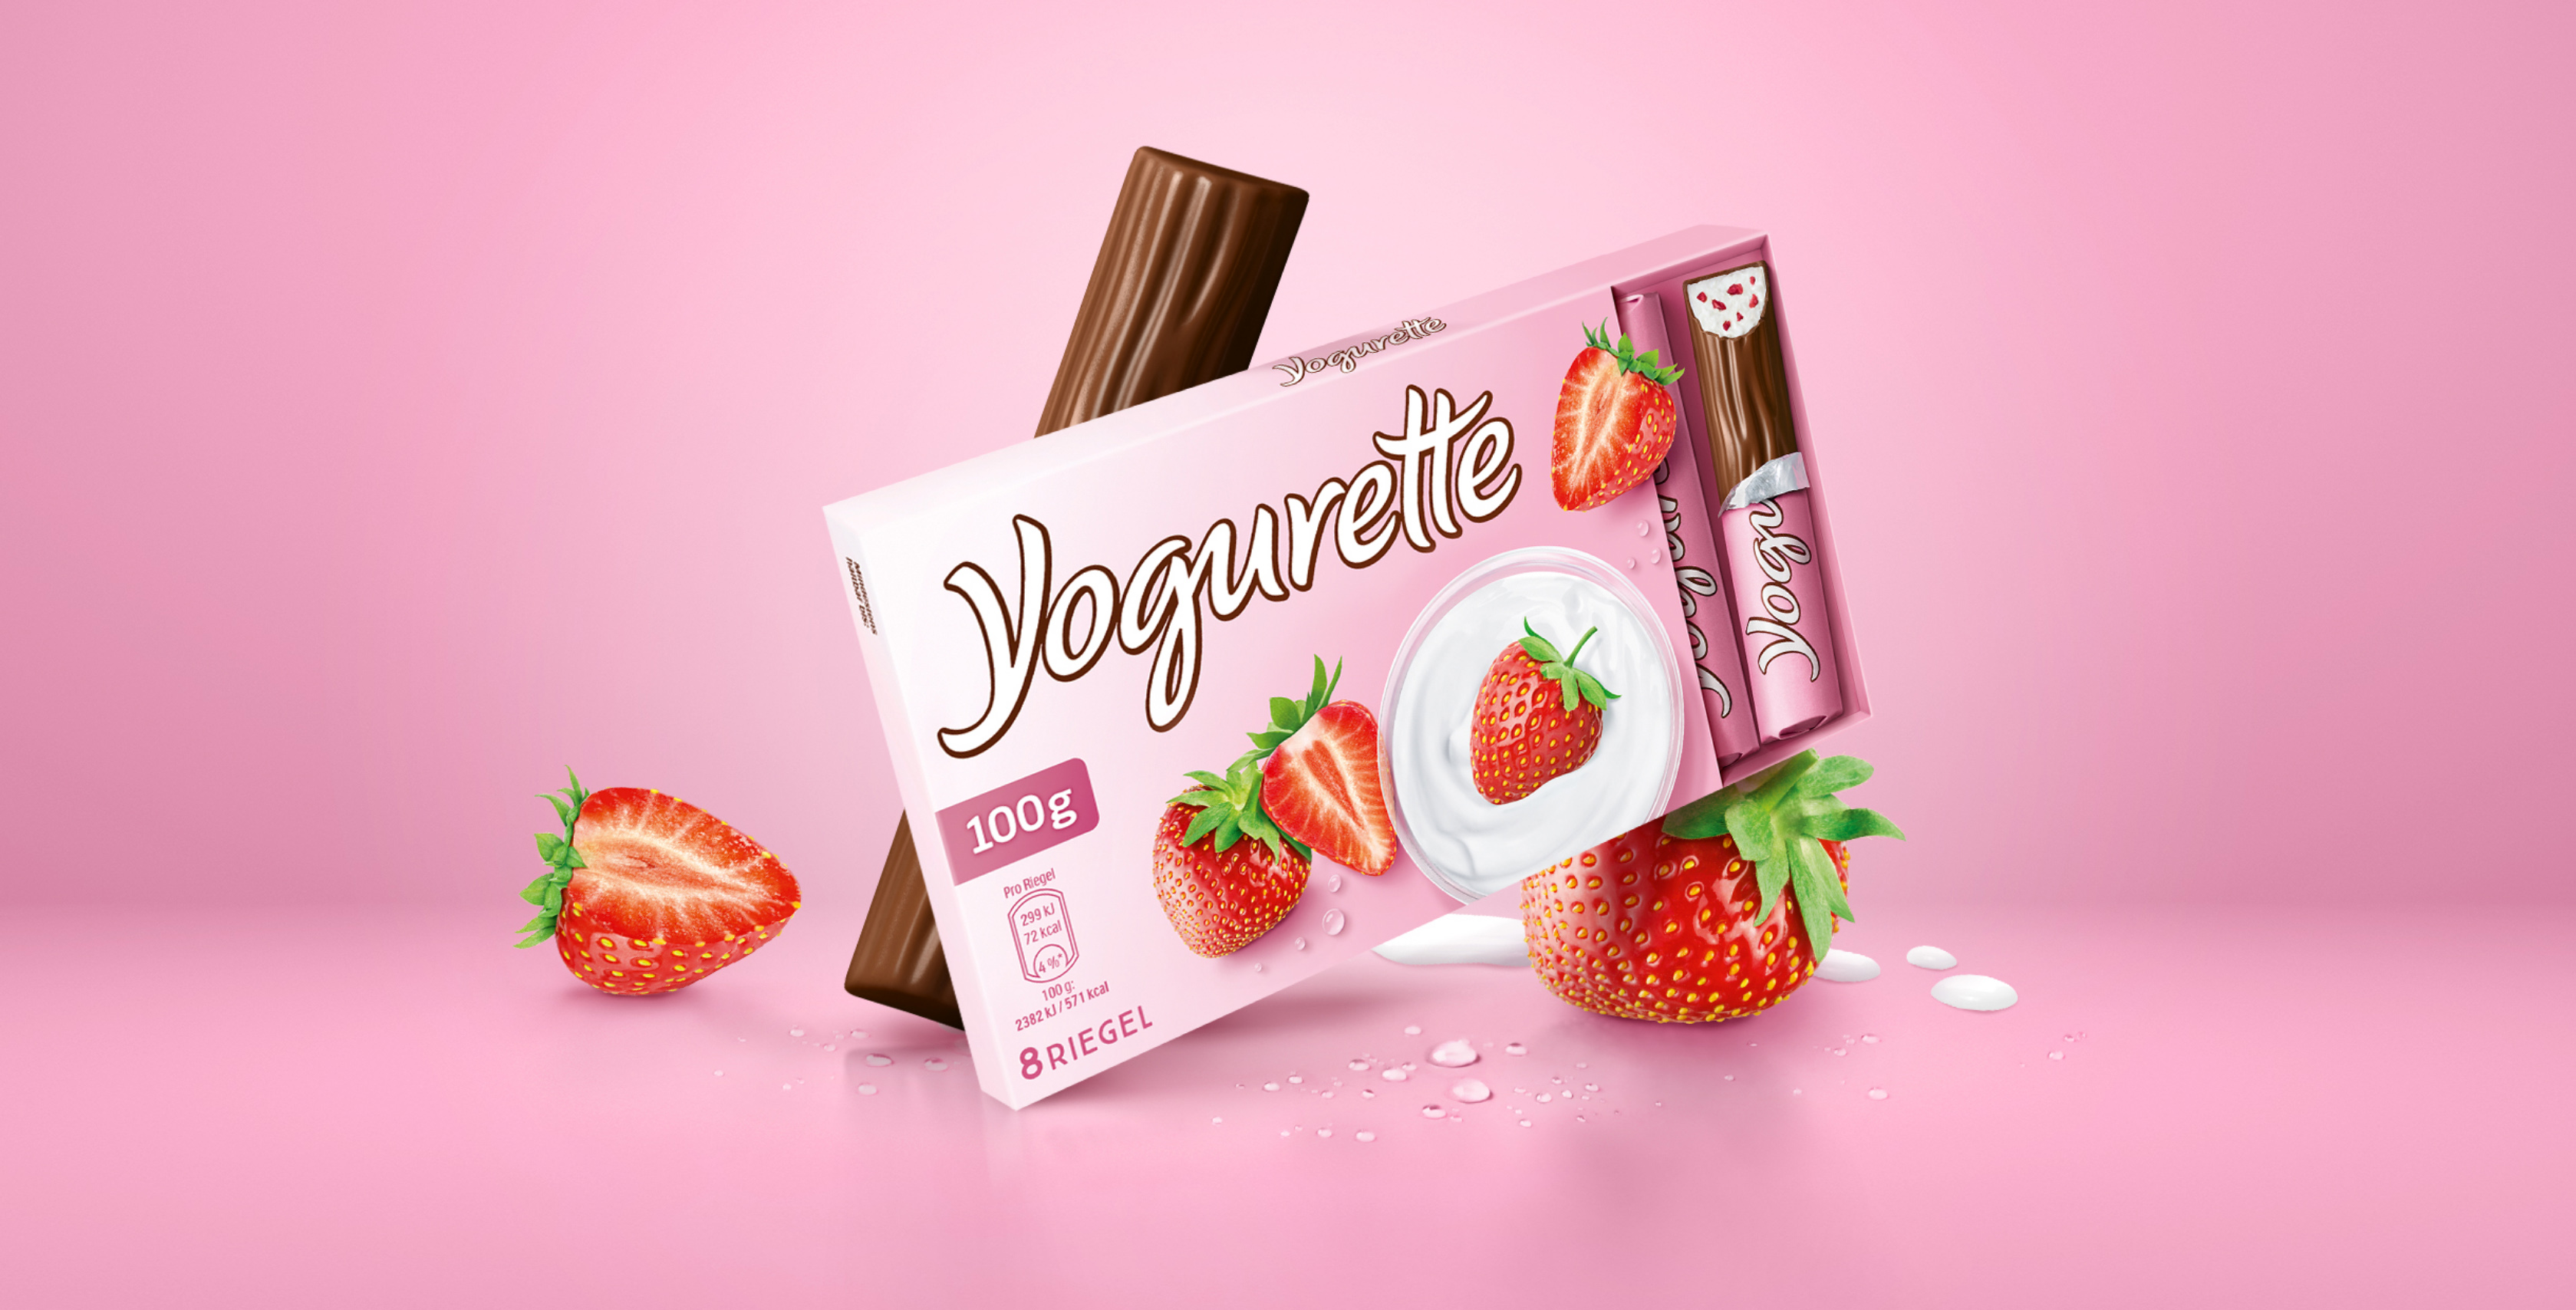 Packaging relaunch Yogurette, a package stands in a virtual pink room with strawberries, chocolate bars and milk drops